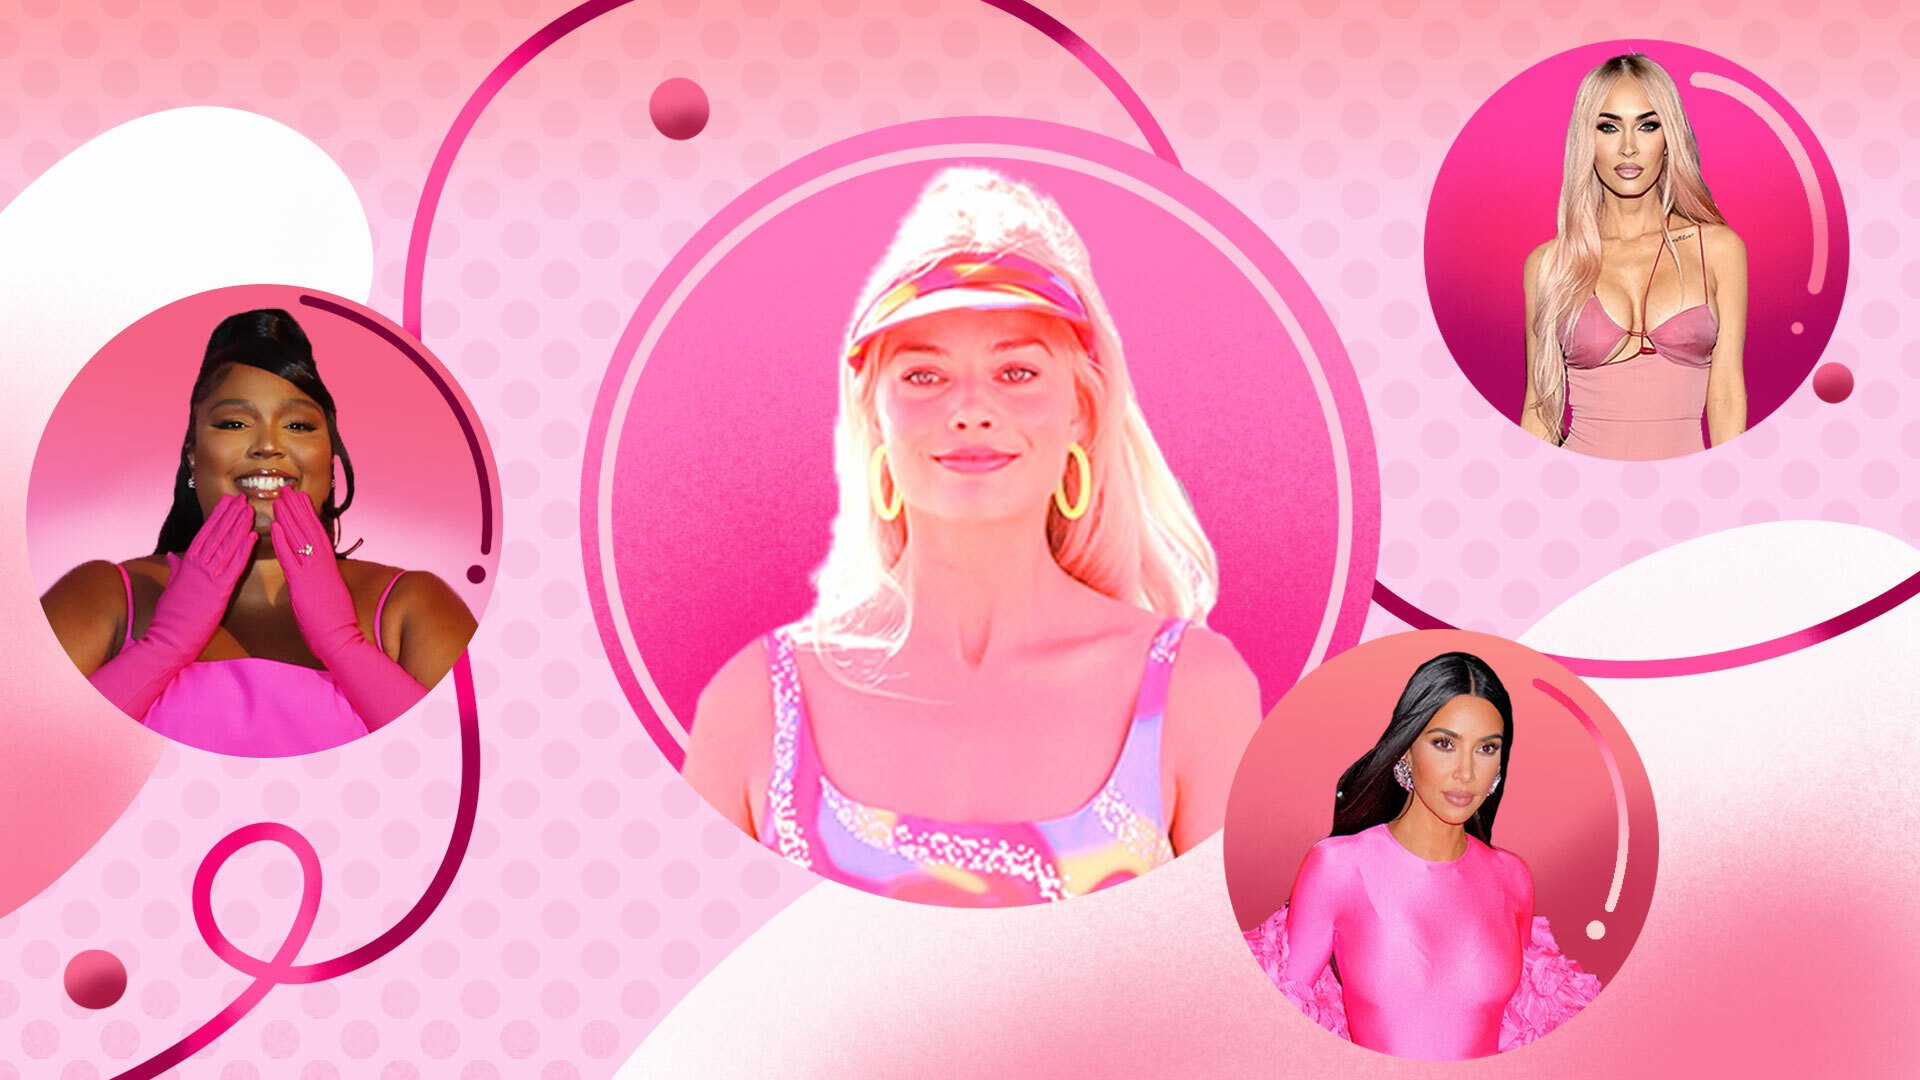 A pink background with circular pictures of Margot Robbie, Lizzo, Kim Kardashian, and Megan Fox.